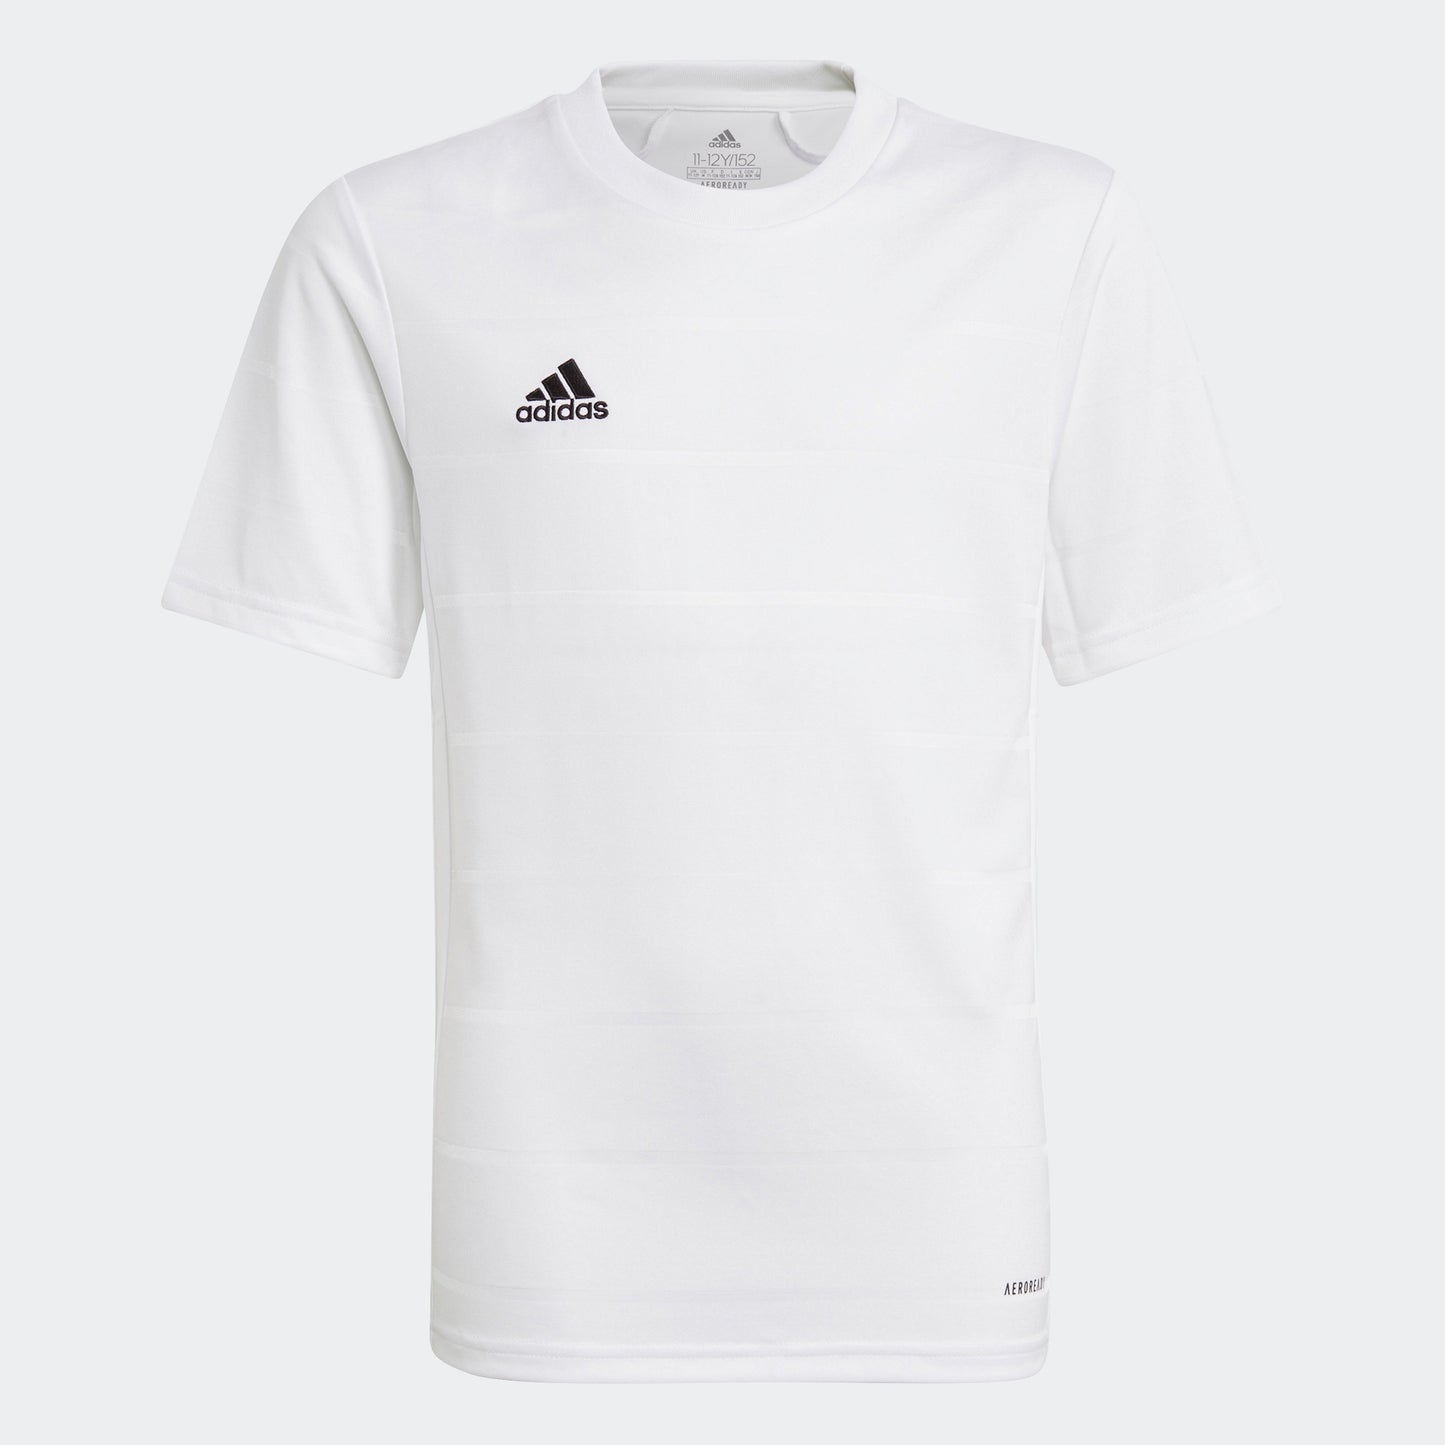 adidas CAMPEON 21 Soccer Jersey | White | Youth